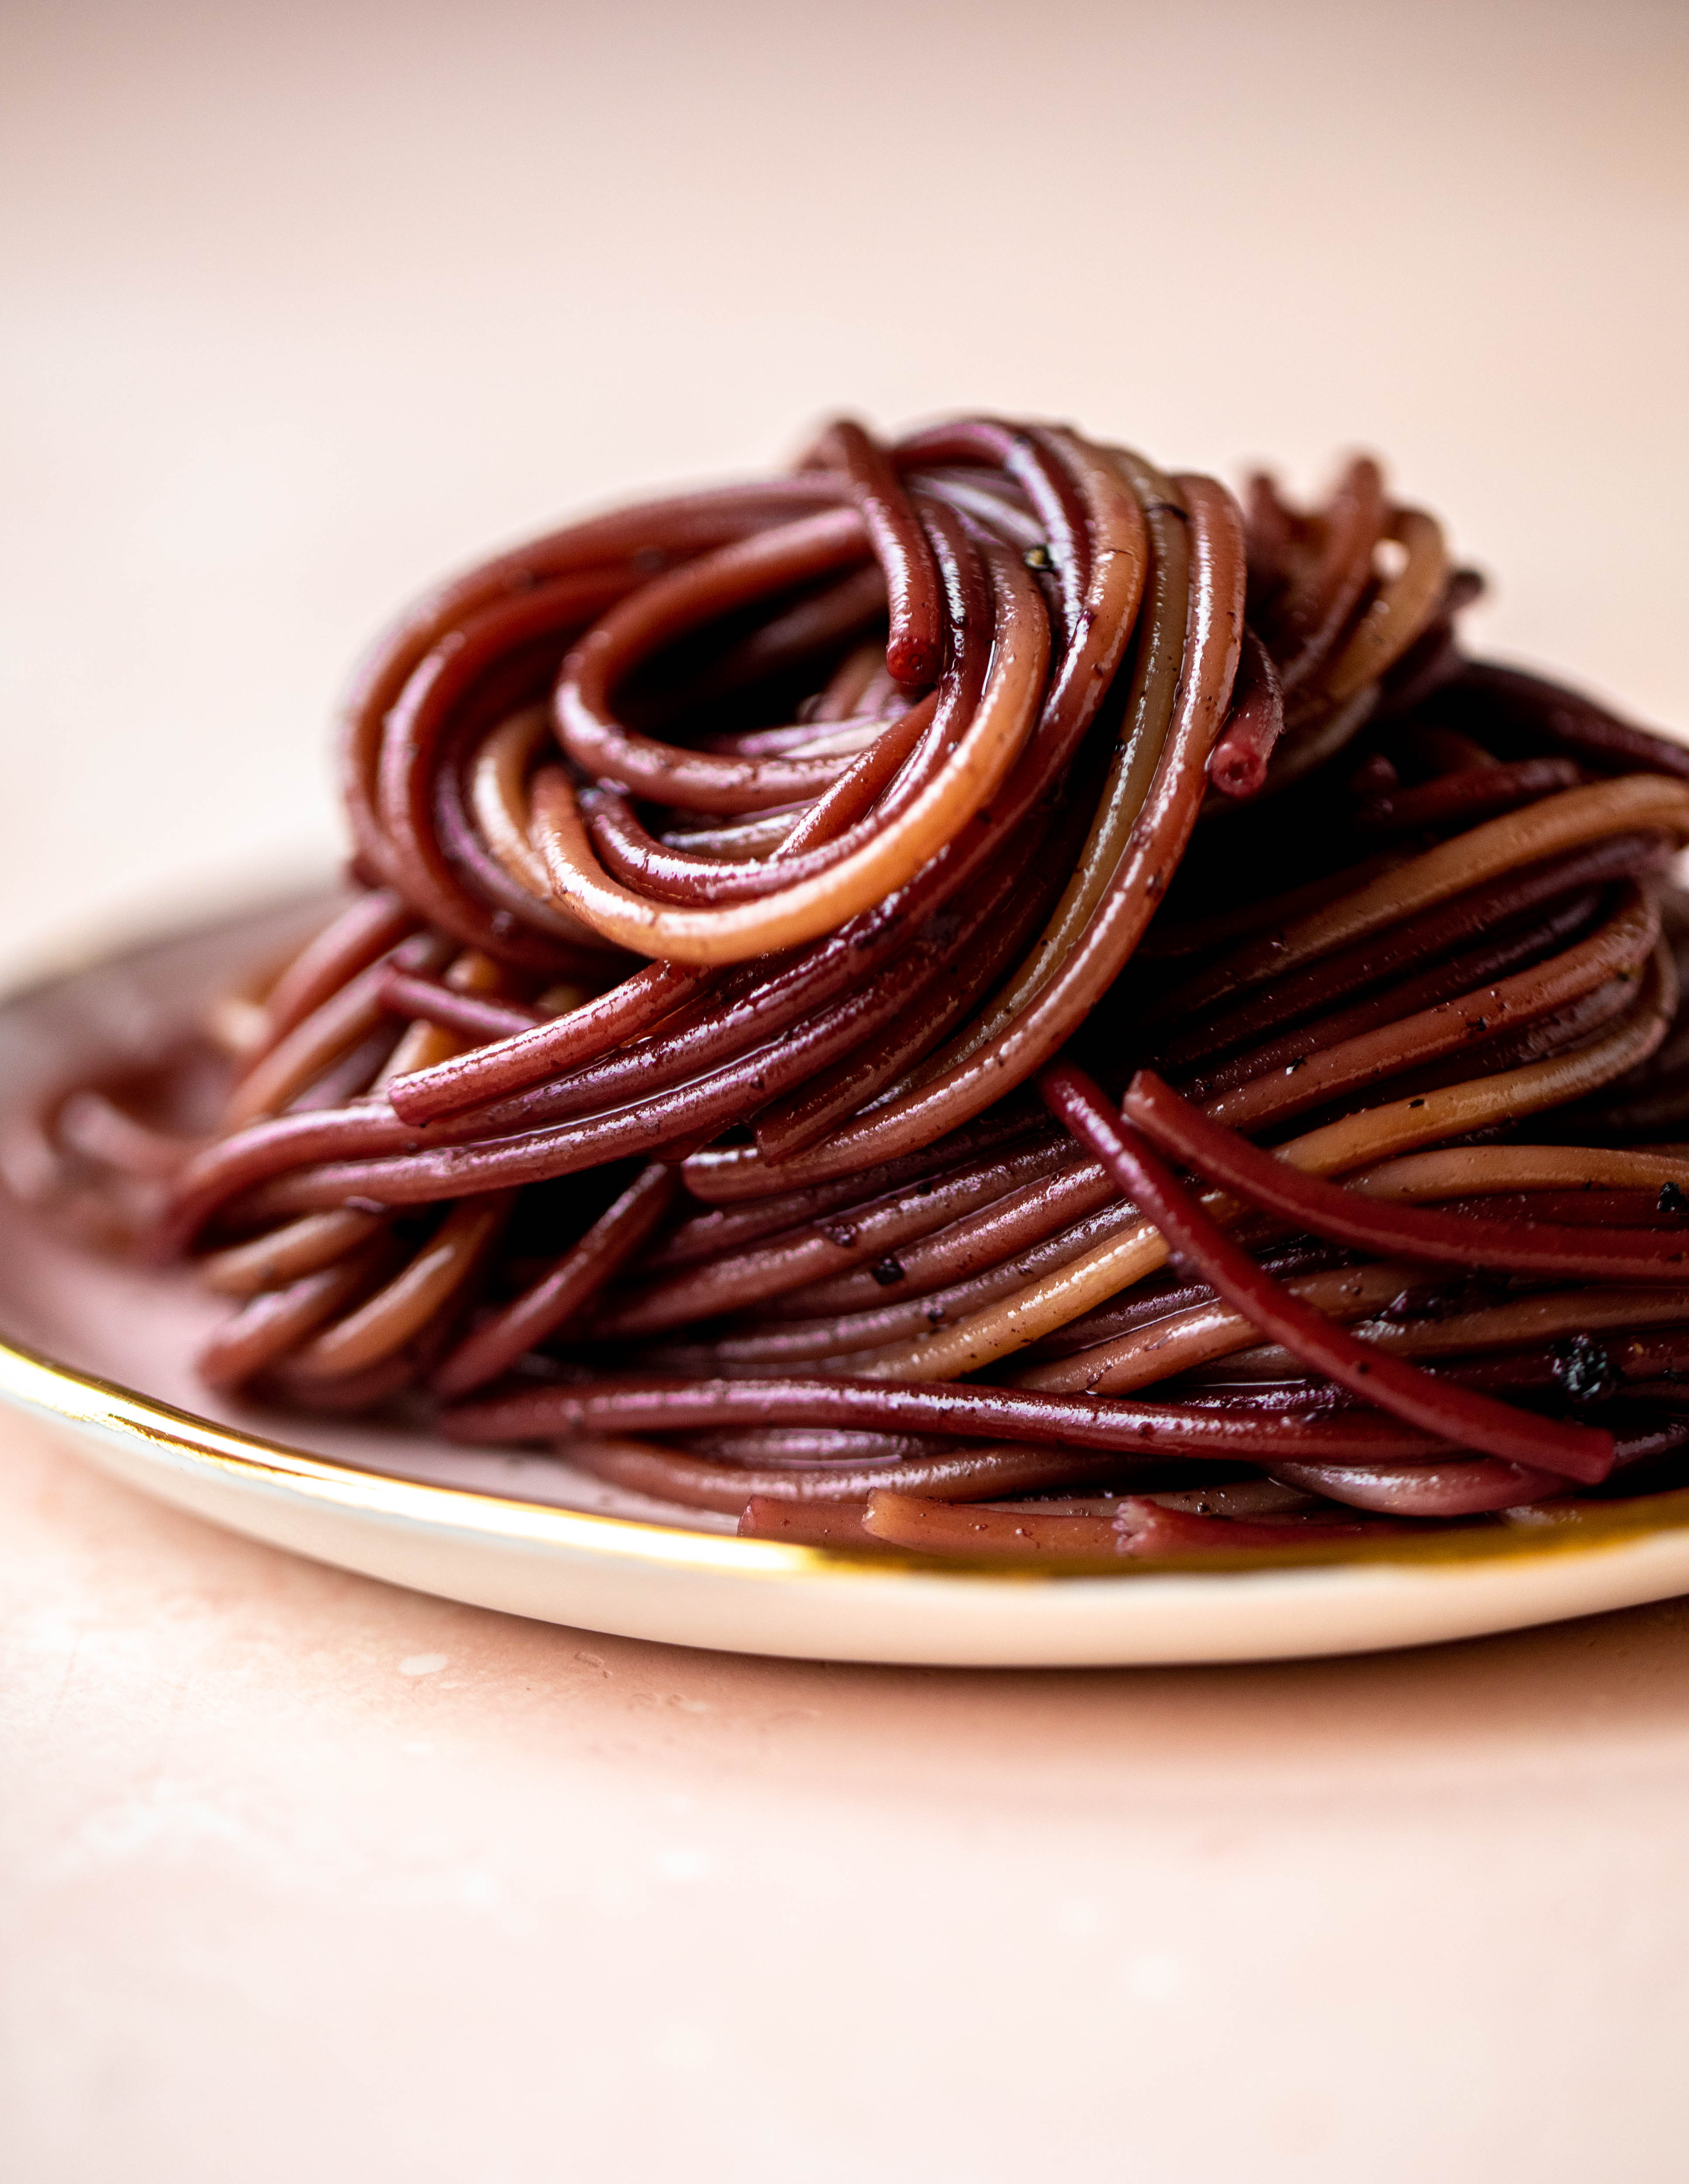 This red wine pasta is an easy, flavorful dinner! Red wine cooked down with garlic and butter until sauce-like. Throw in noodles and you have dinner!